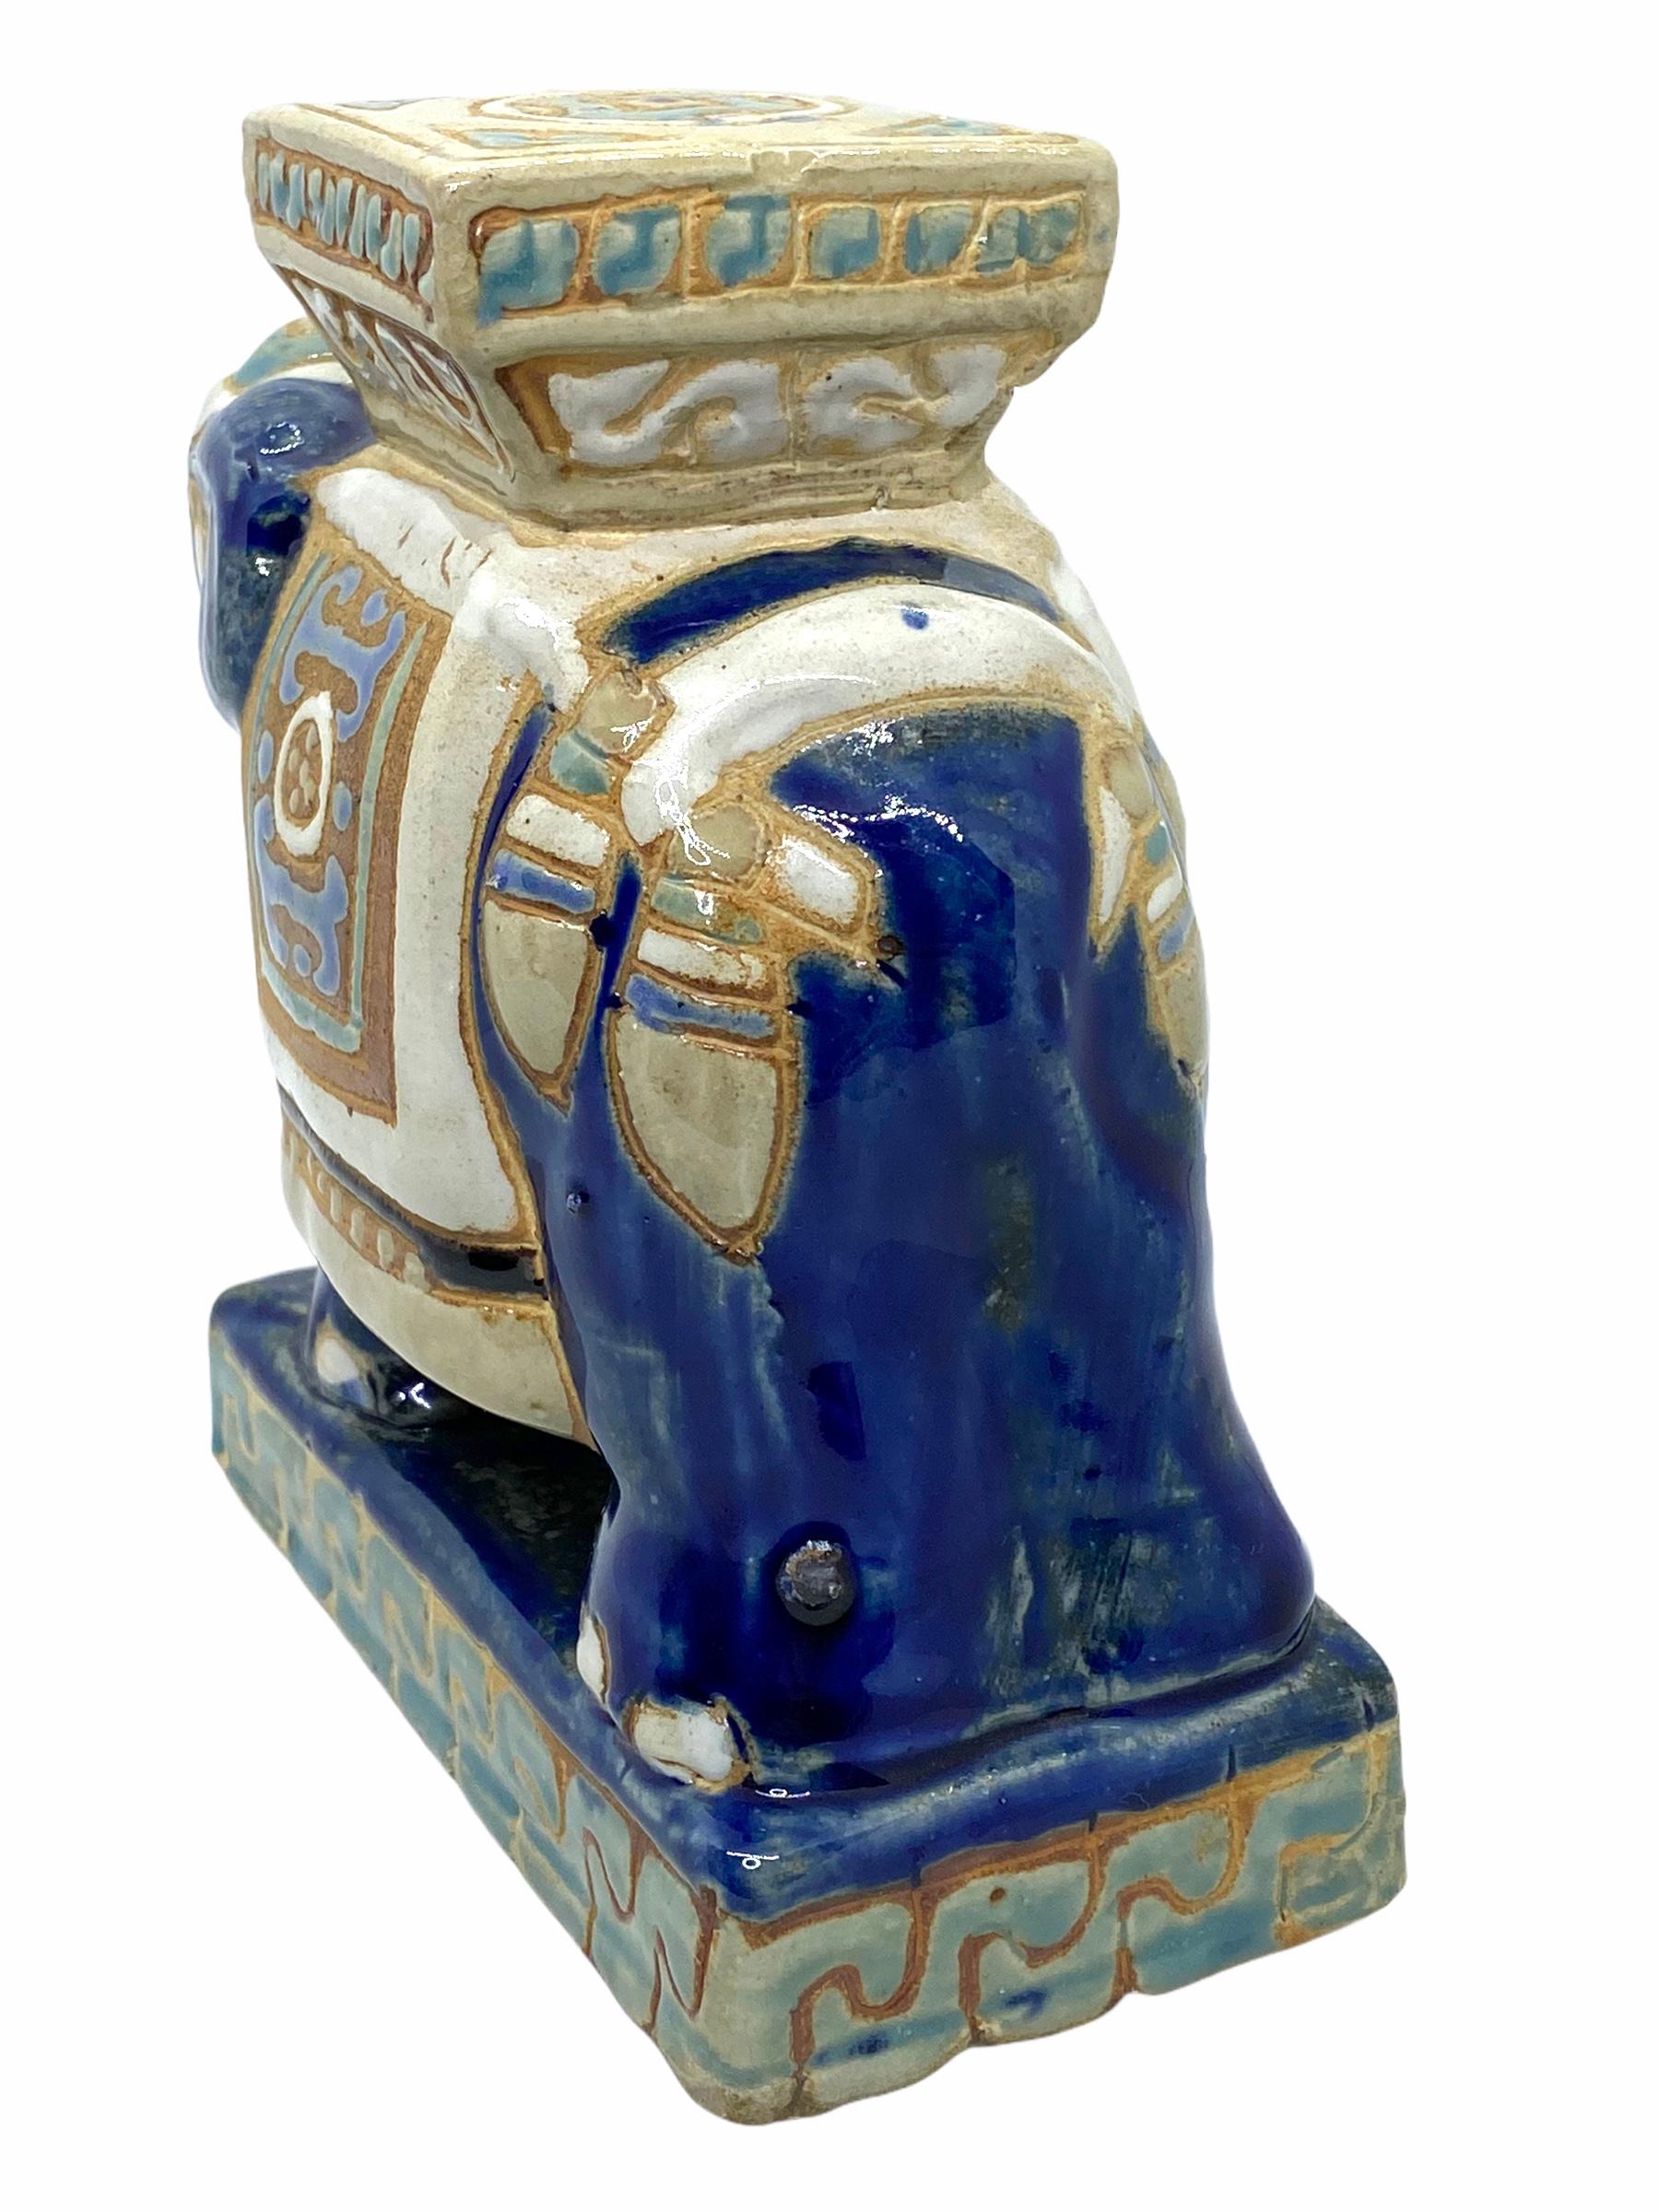 Mid-20th Century Petite Vintage Hollywood Regency Chinese Blue Elephant Stool Plant Stand or Seat For Sale